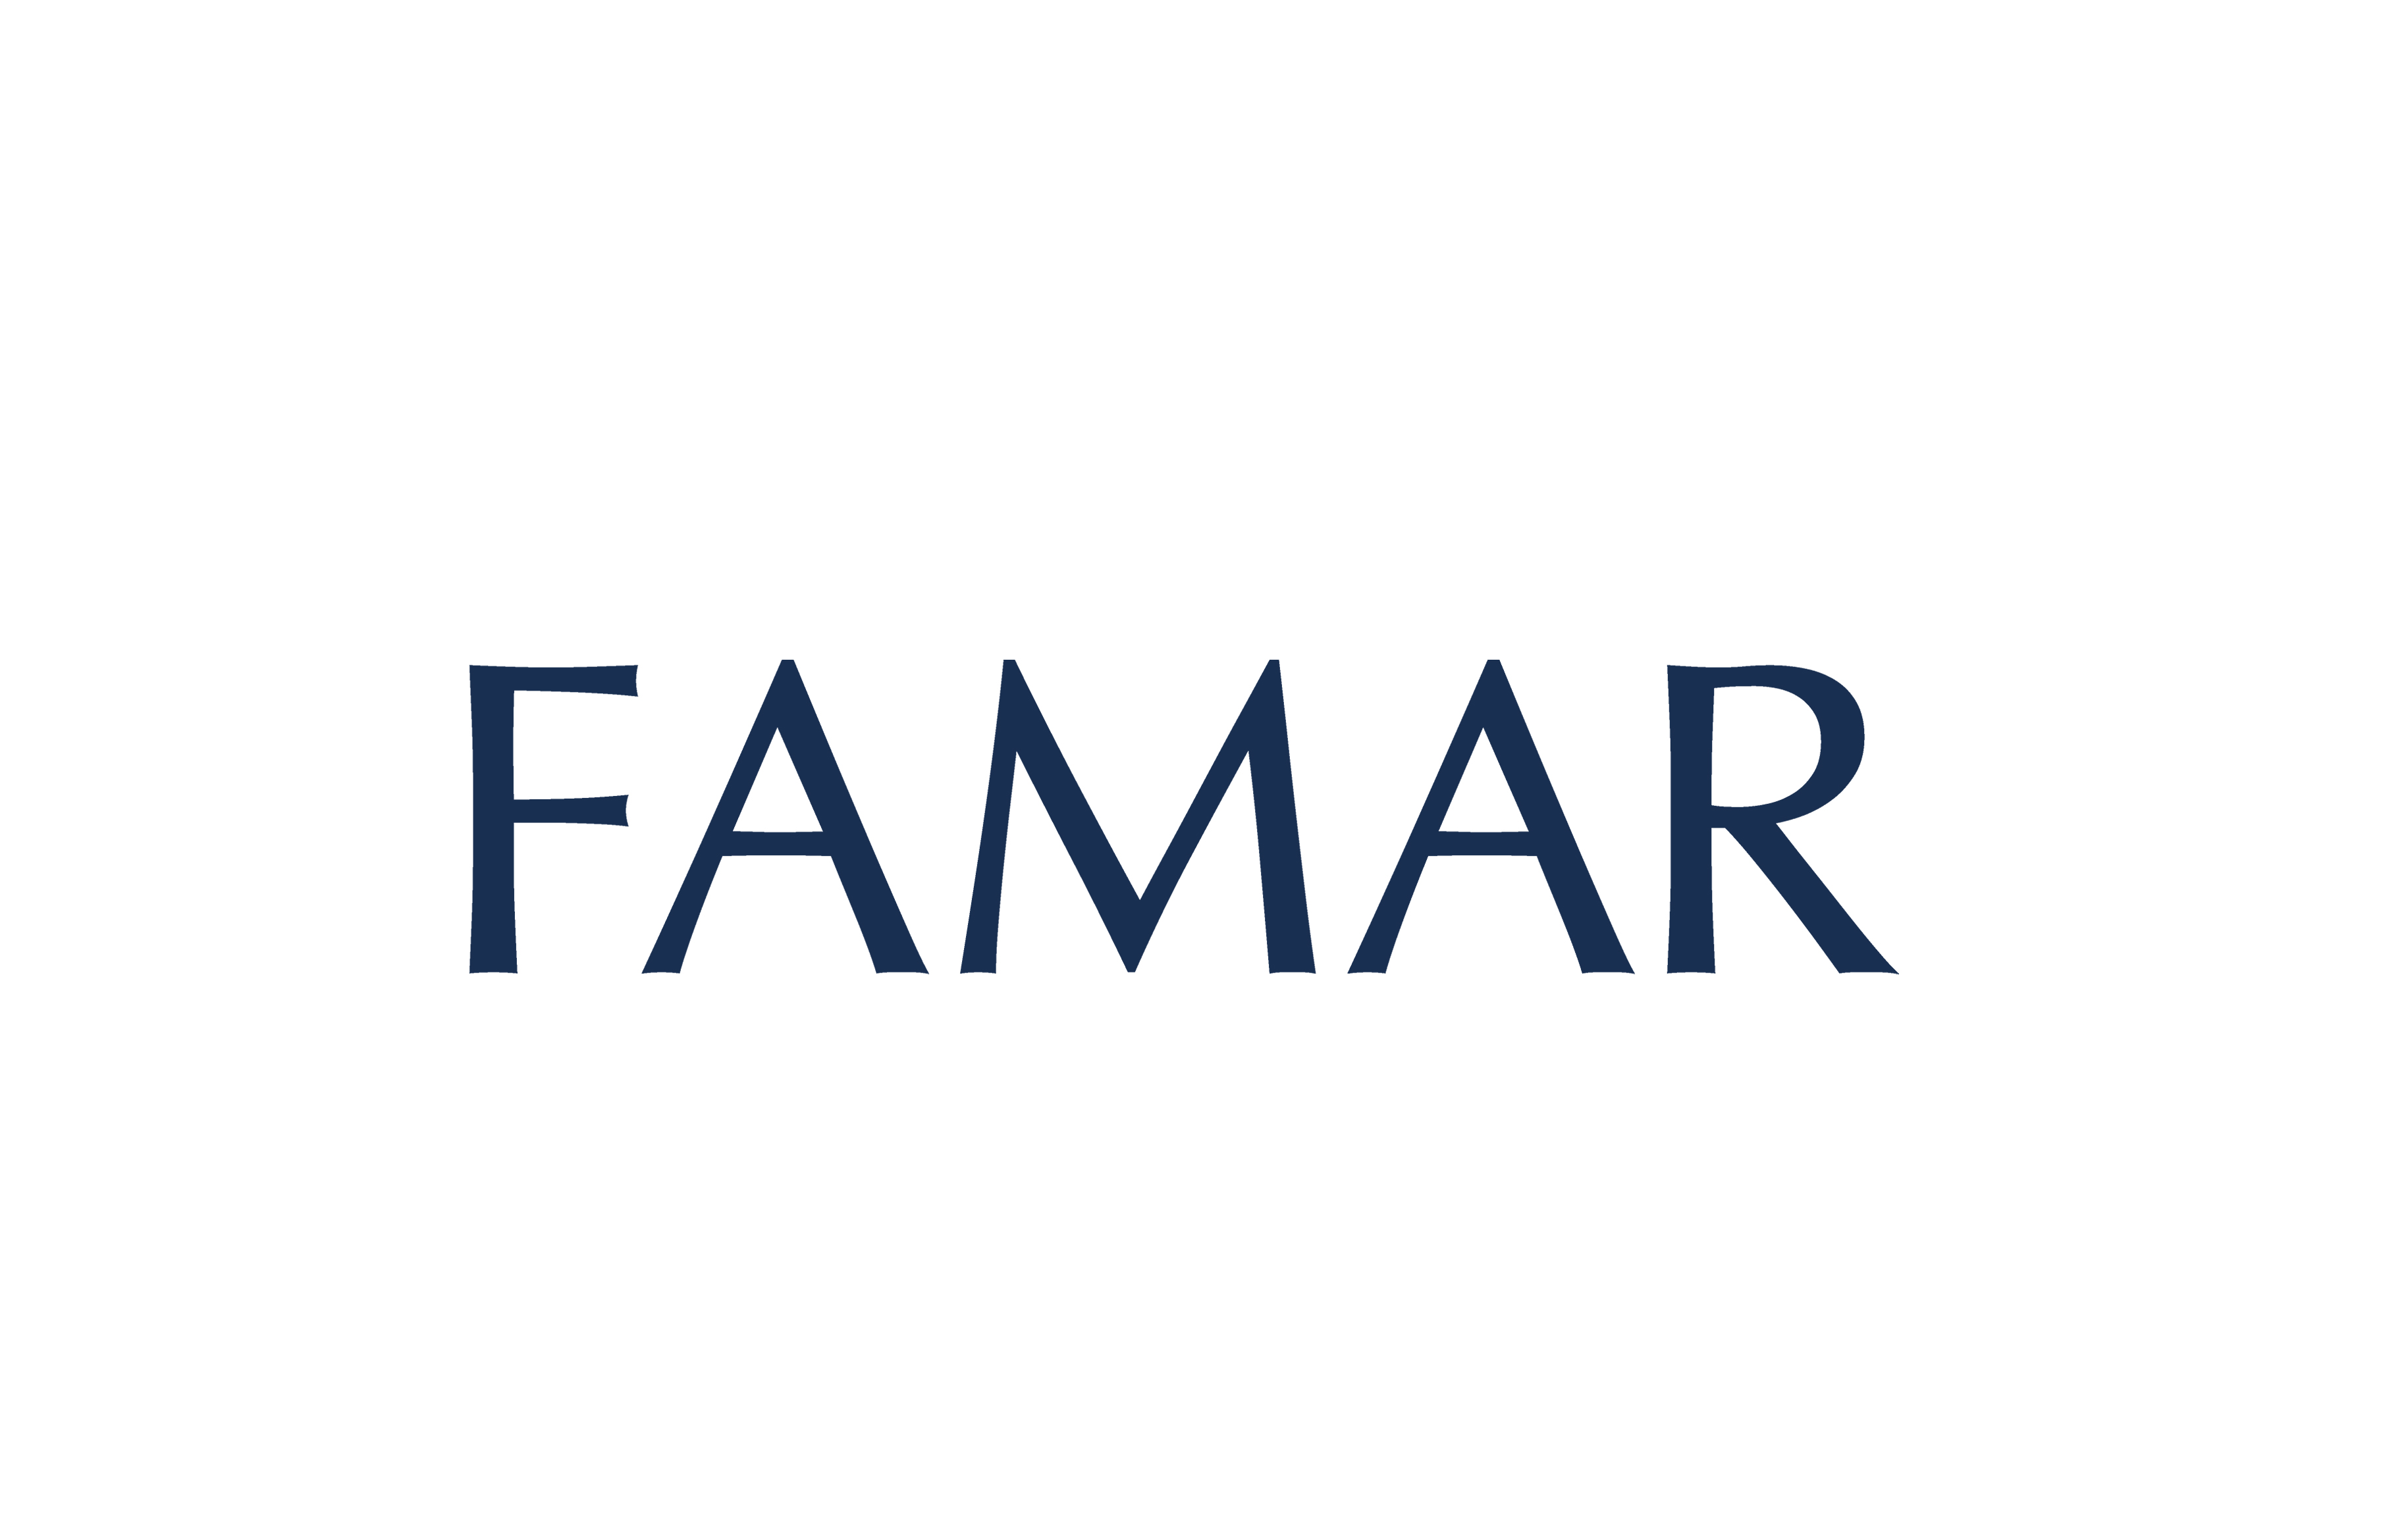 About FAMAR ANONYMOUS INDUSTRIAL COMPANY OF PHARMACEUTICALS AND COSMETICS. Industrial Company Logo